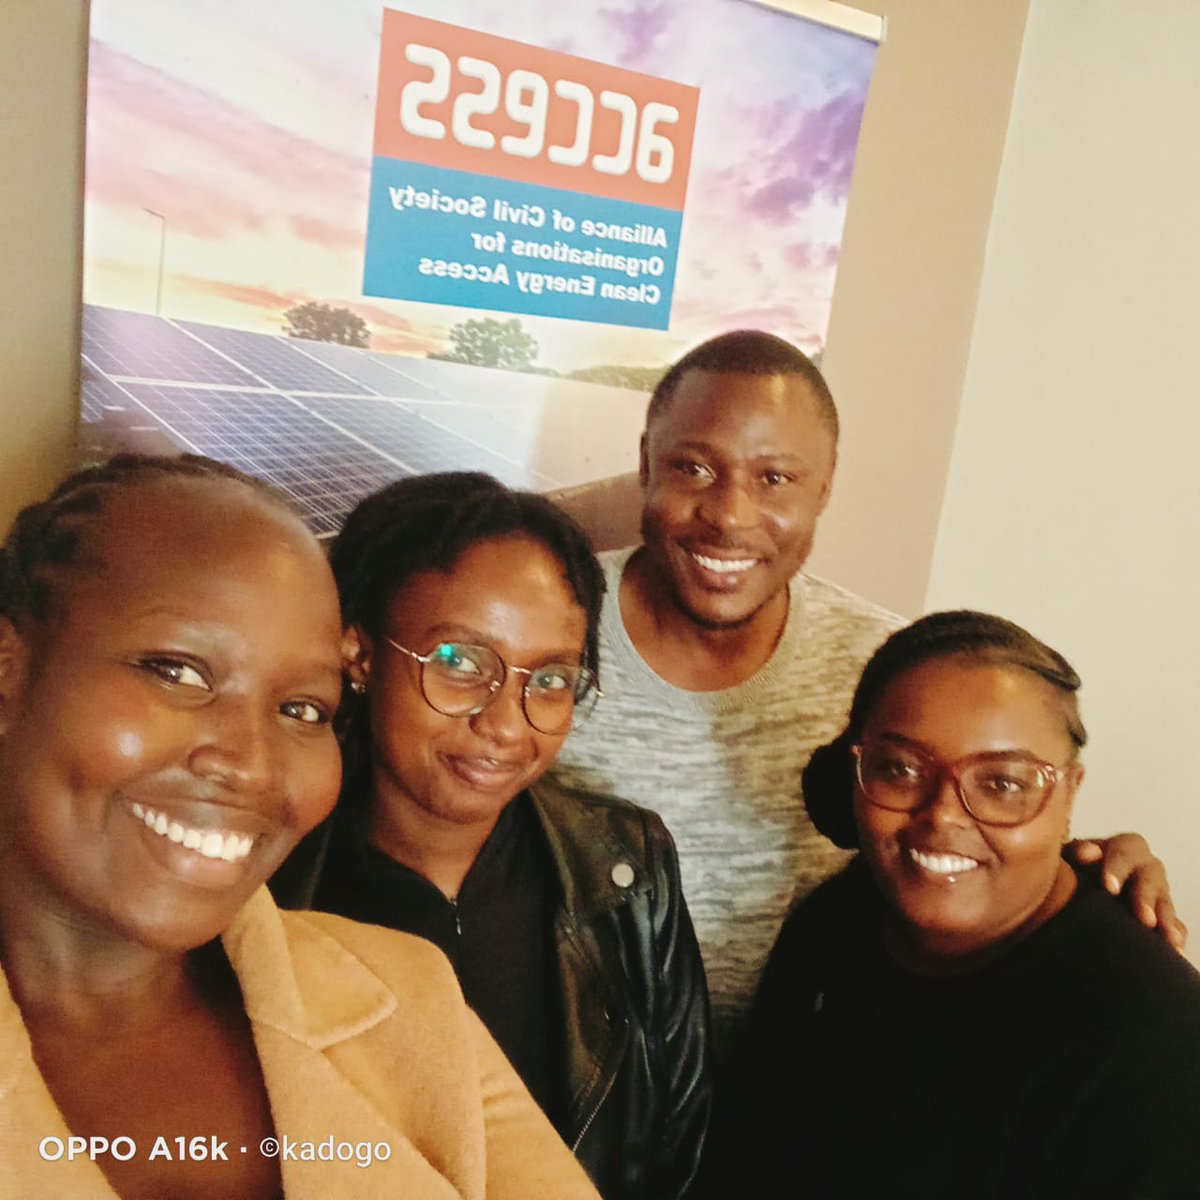 Today has been a very instrumental day to be part of empowering voices on Capacity Development for Effective Energy and Climate Change Advocacy @ACCESSCSOs @WallaceGlobal @UN_Energy @KCCWG @Emiekaranja @gakksss #EnergyAdvocacy #EnergyTransition